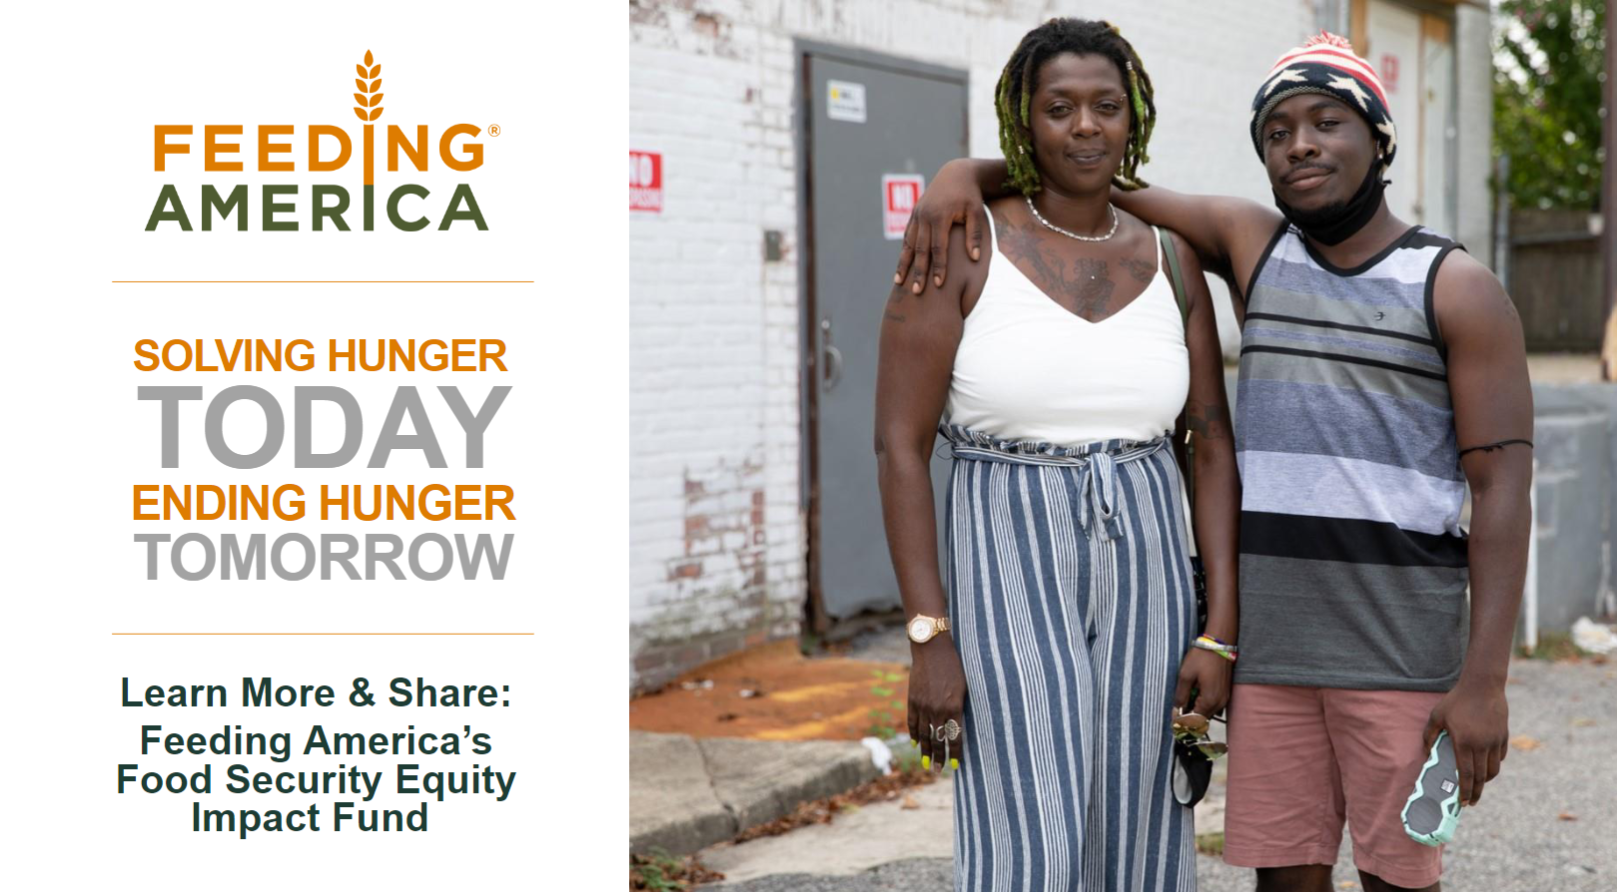 Part 1: Learn About Feeding America's Food Security Equity Impact Fund